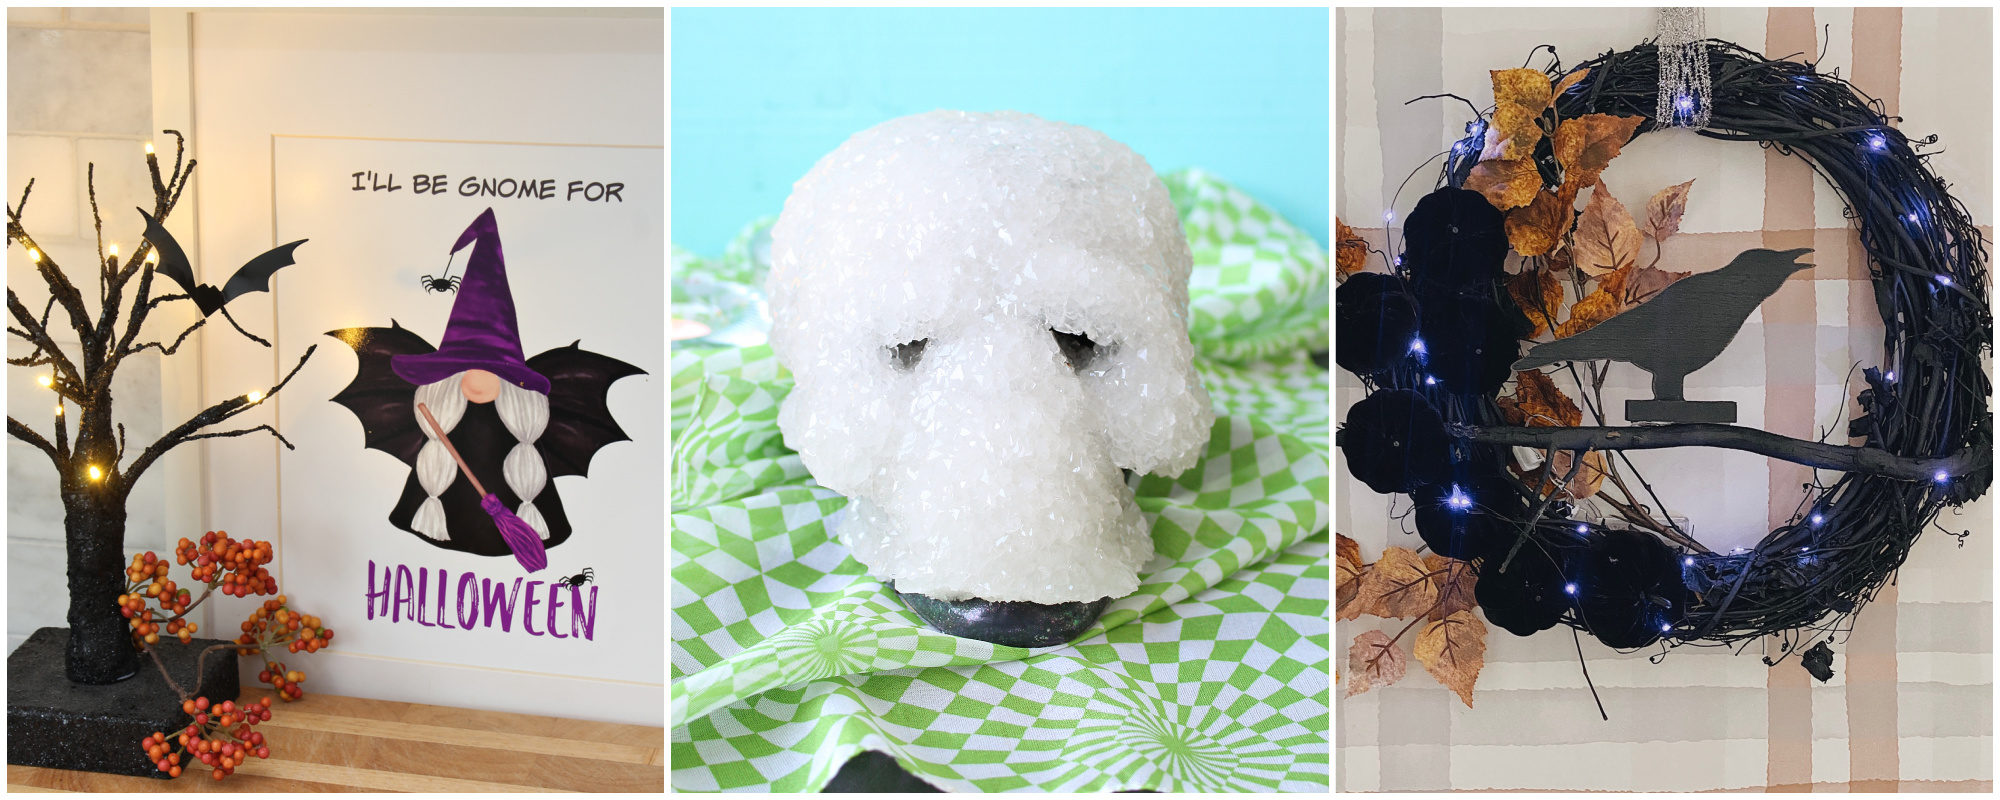 a collage image with three Halloween DIY ideas